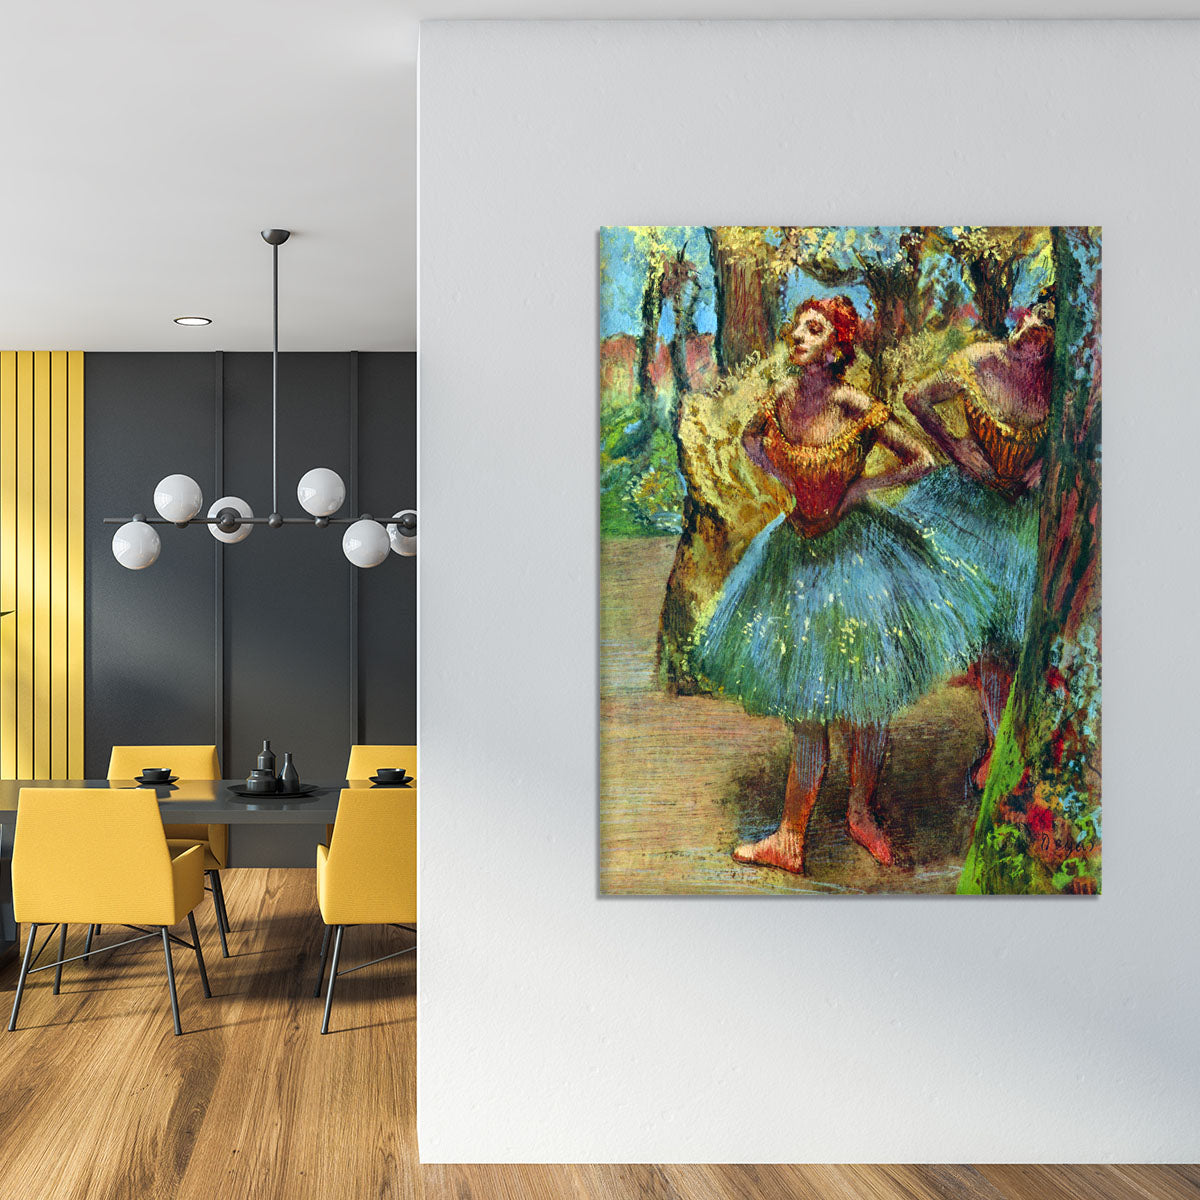 Dancers 2 by Degas Canvas Print or Poster - Canvas Art Rocks - 4